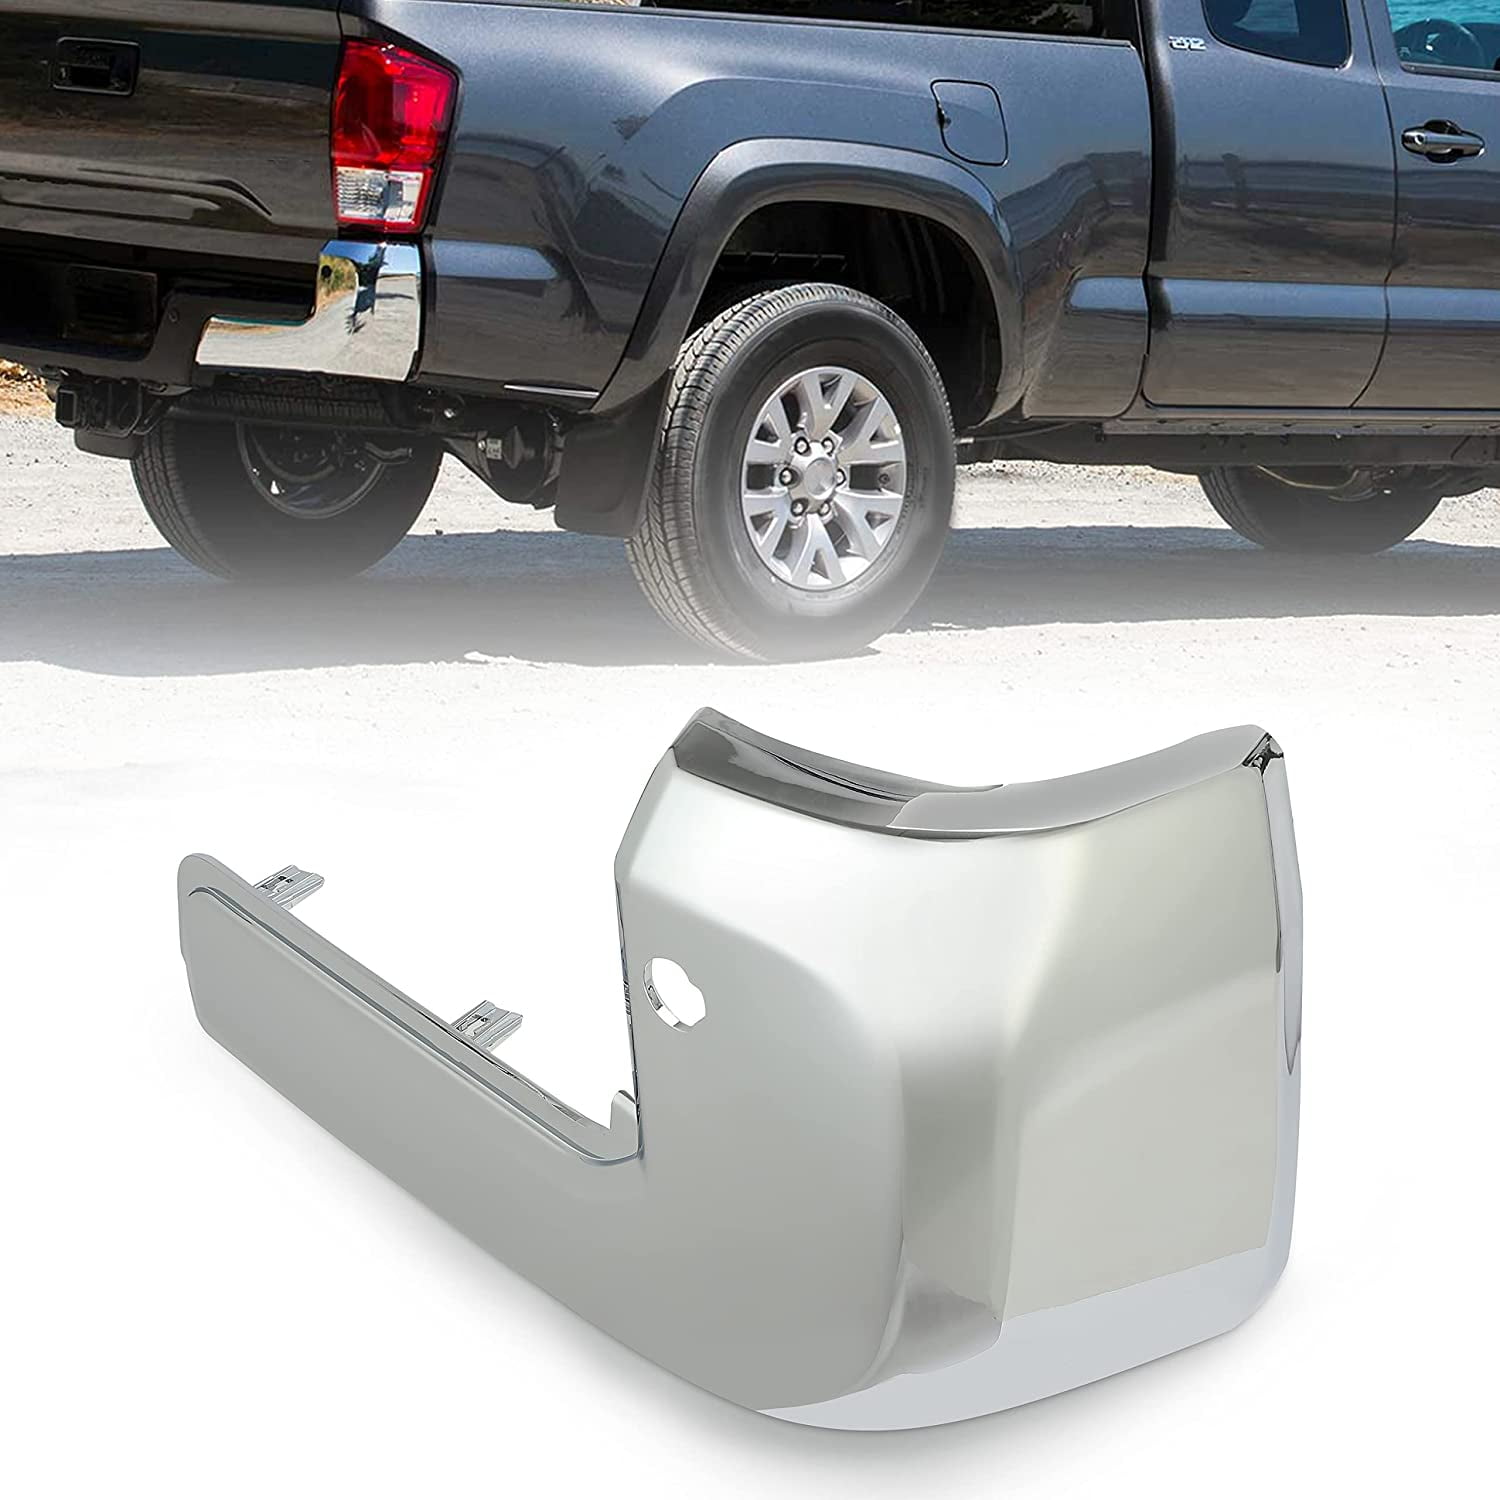 StarONE Rear Bumper End Cap W/O Sensor Hole Fit for TOYOTA TACOMA 2016-2020 Replace OEM#TO1104133 TO1105133 5215604010 5215504010 